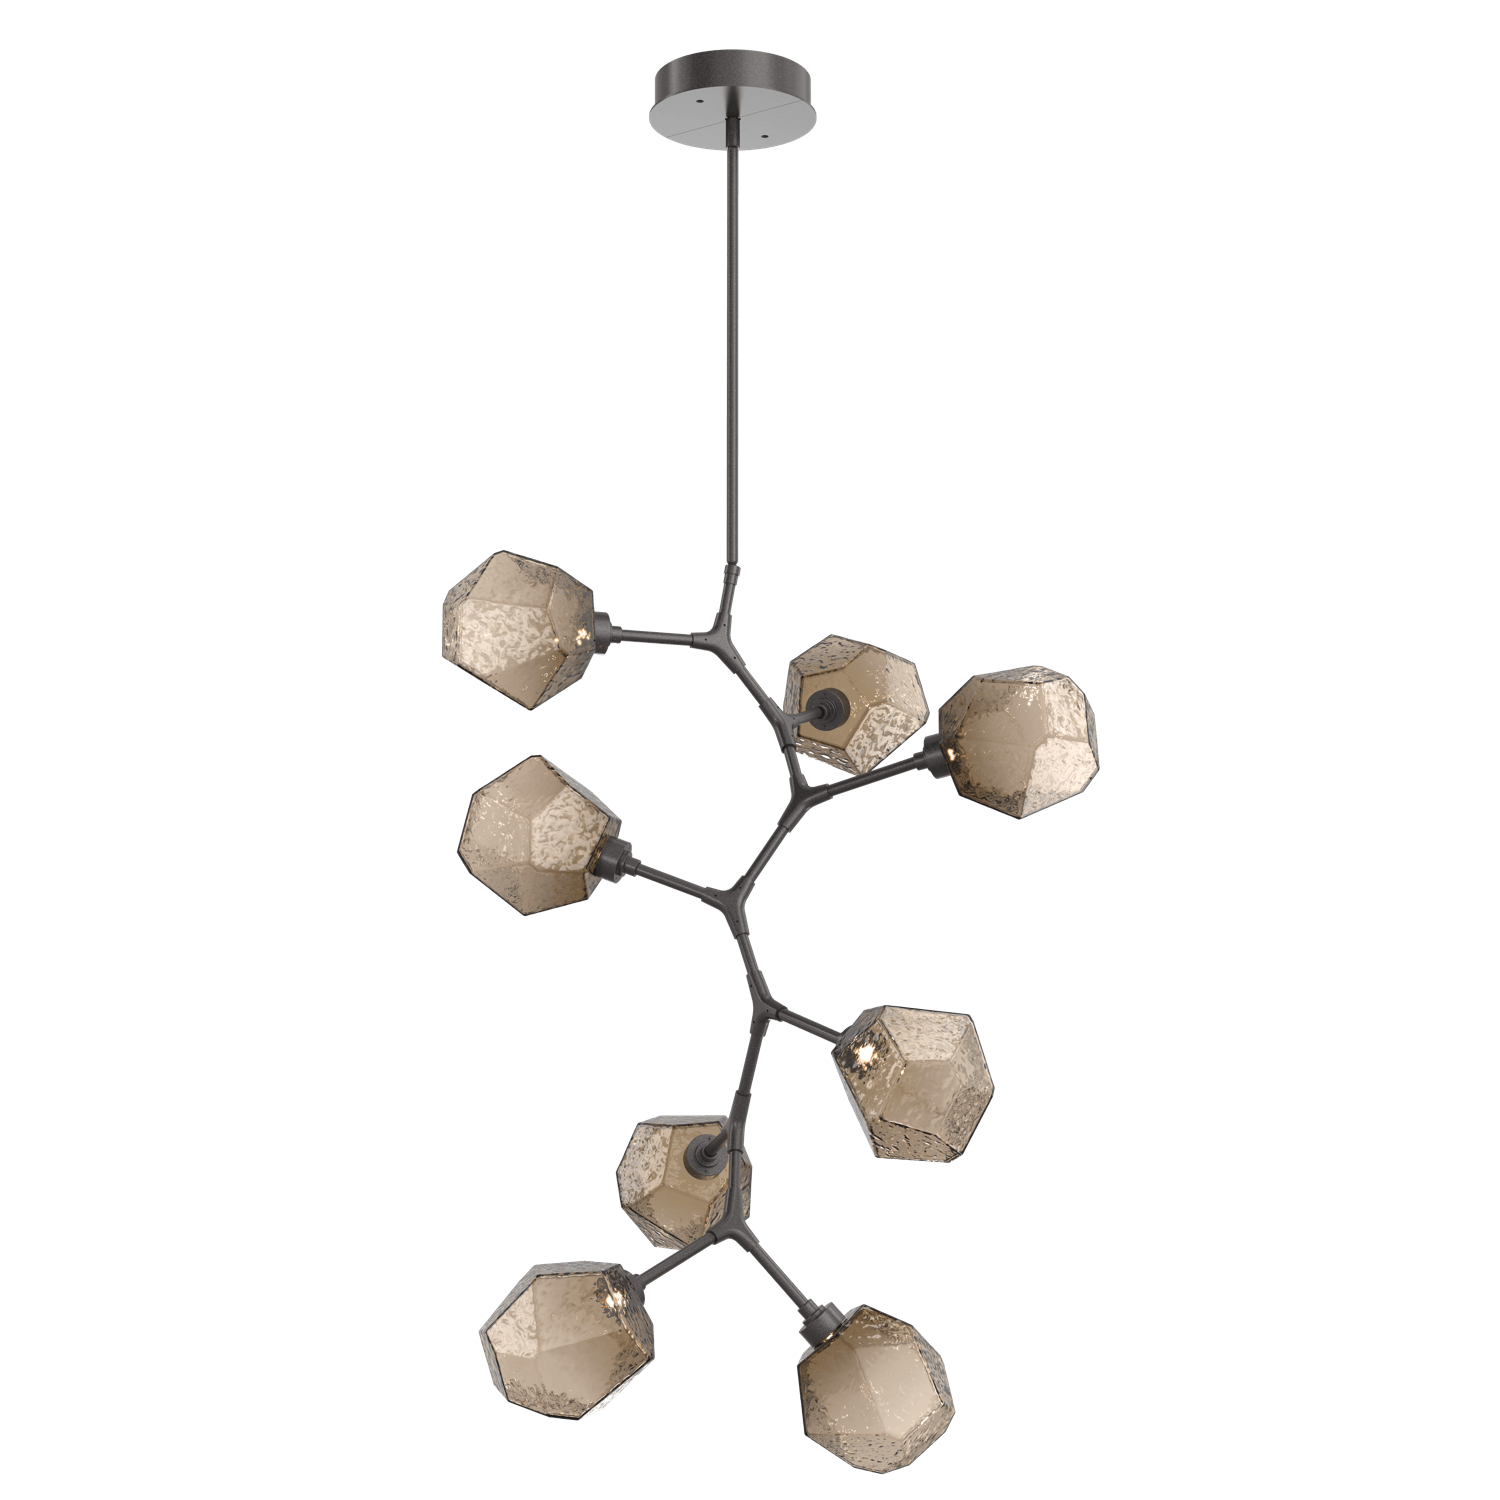 CHB0039-VB-GP-B-Hammerton-Studio-Gem-8-light-modern-vine-chandelier-with-graphite-finish-and-bronze-blown-glass-shades-and-LED-lamping